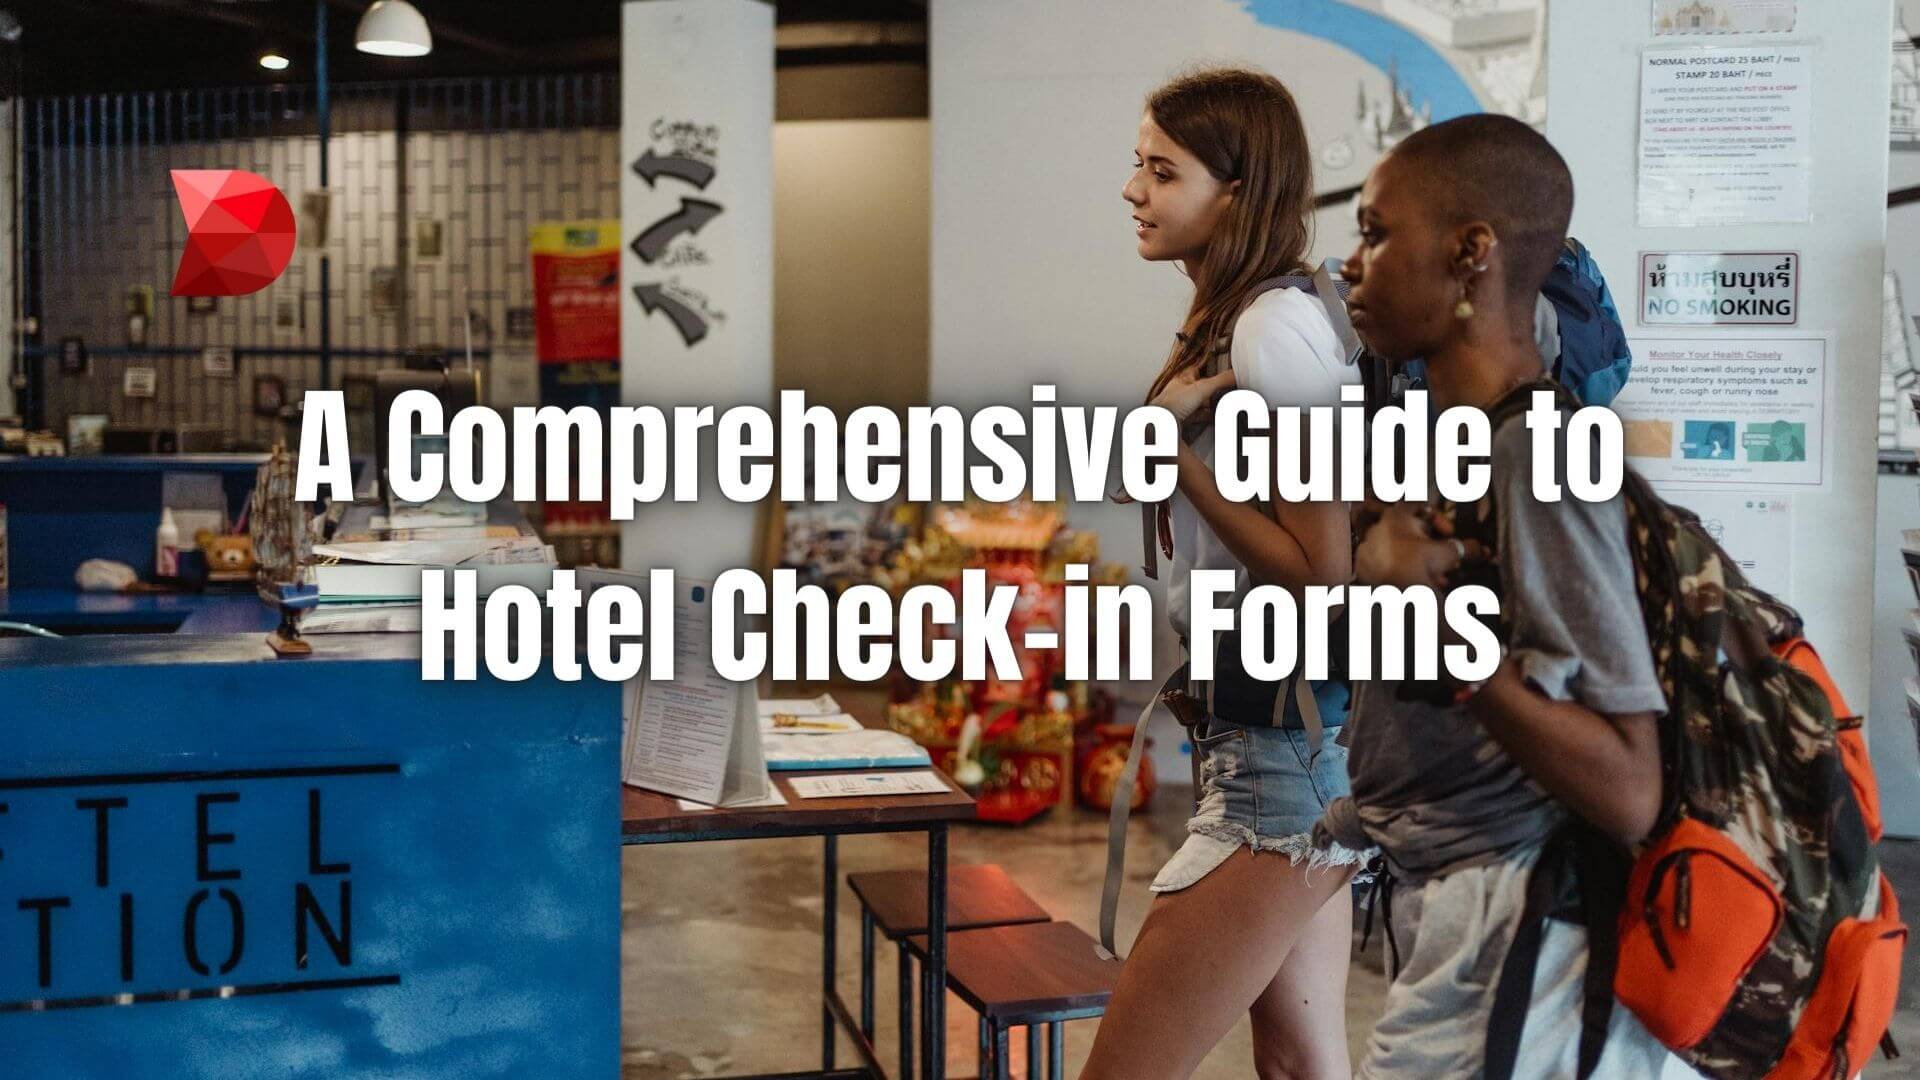 Unlock seamless hotel stays with our guide to check-in forms. Learn the essentials for a smooth arrival and hassle-free experience.